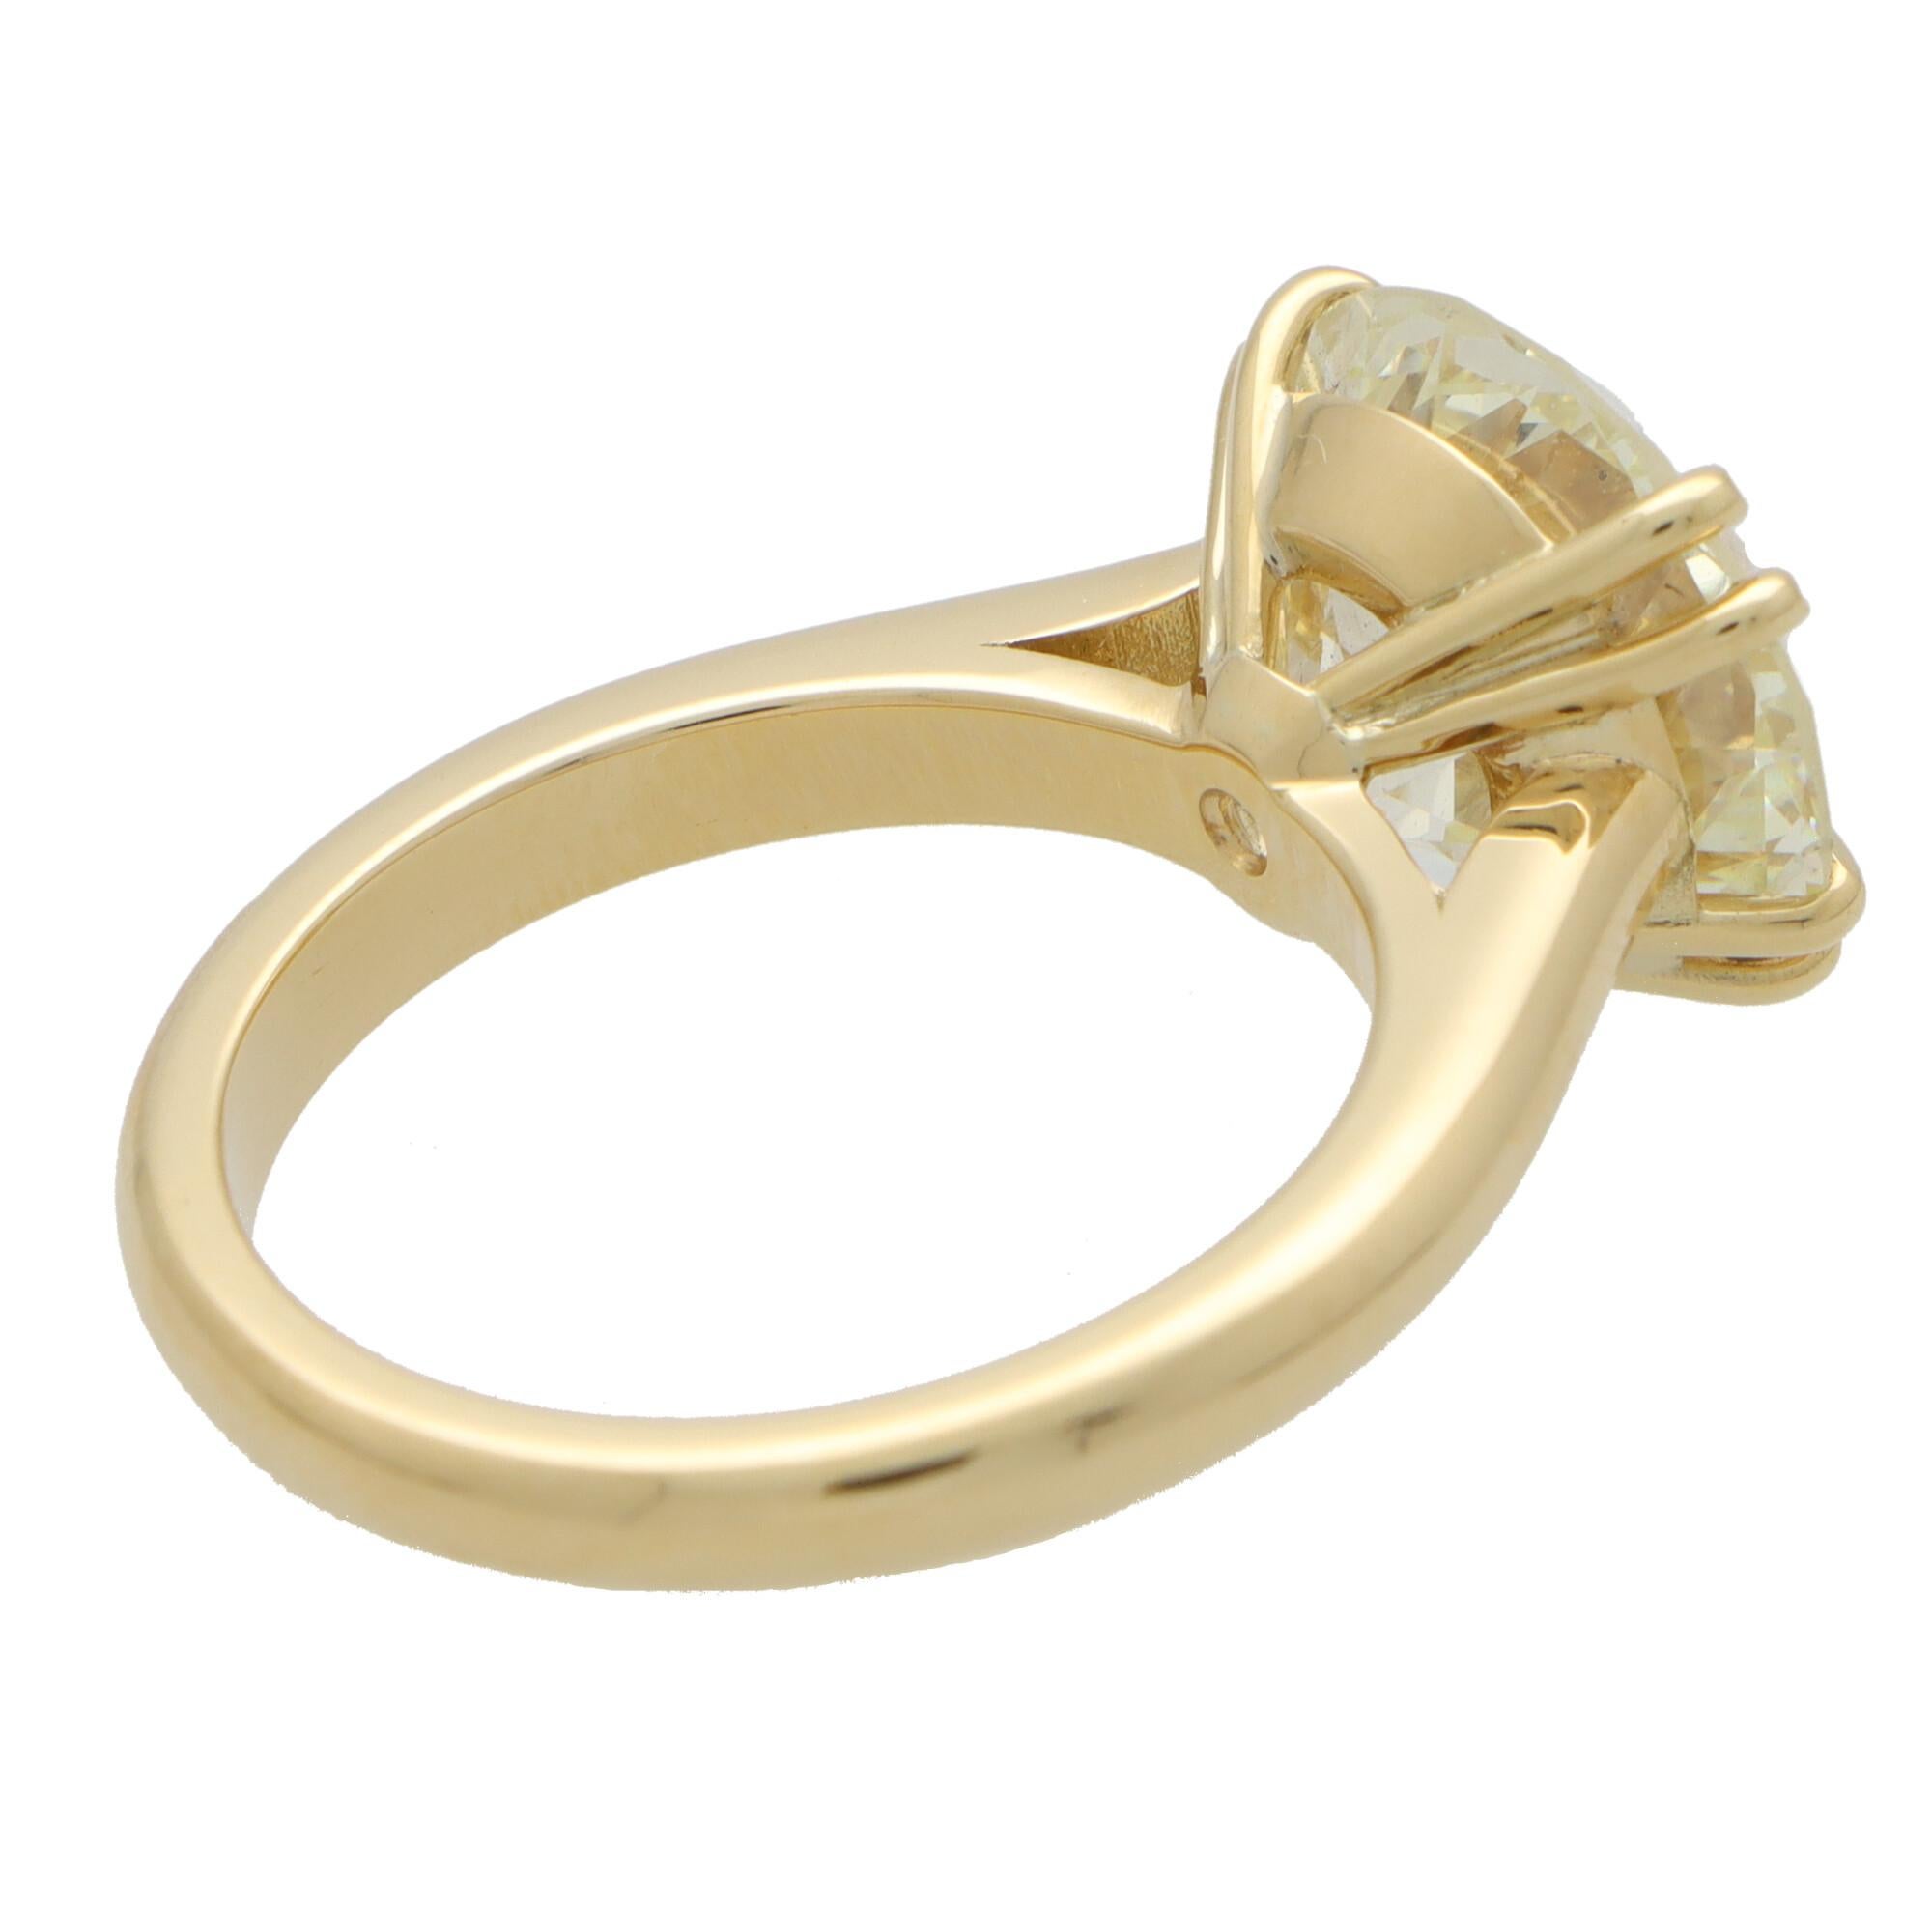 Certified 7.01 Carat Old Cut Diamond Solitaire Ring in Yellow Gold For Sale 2